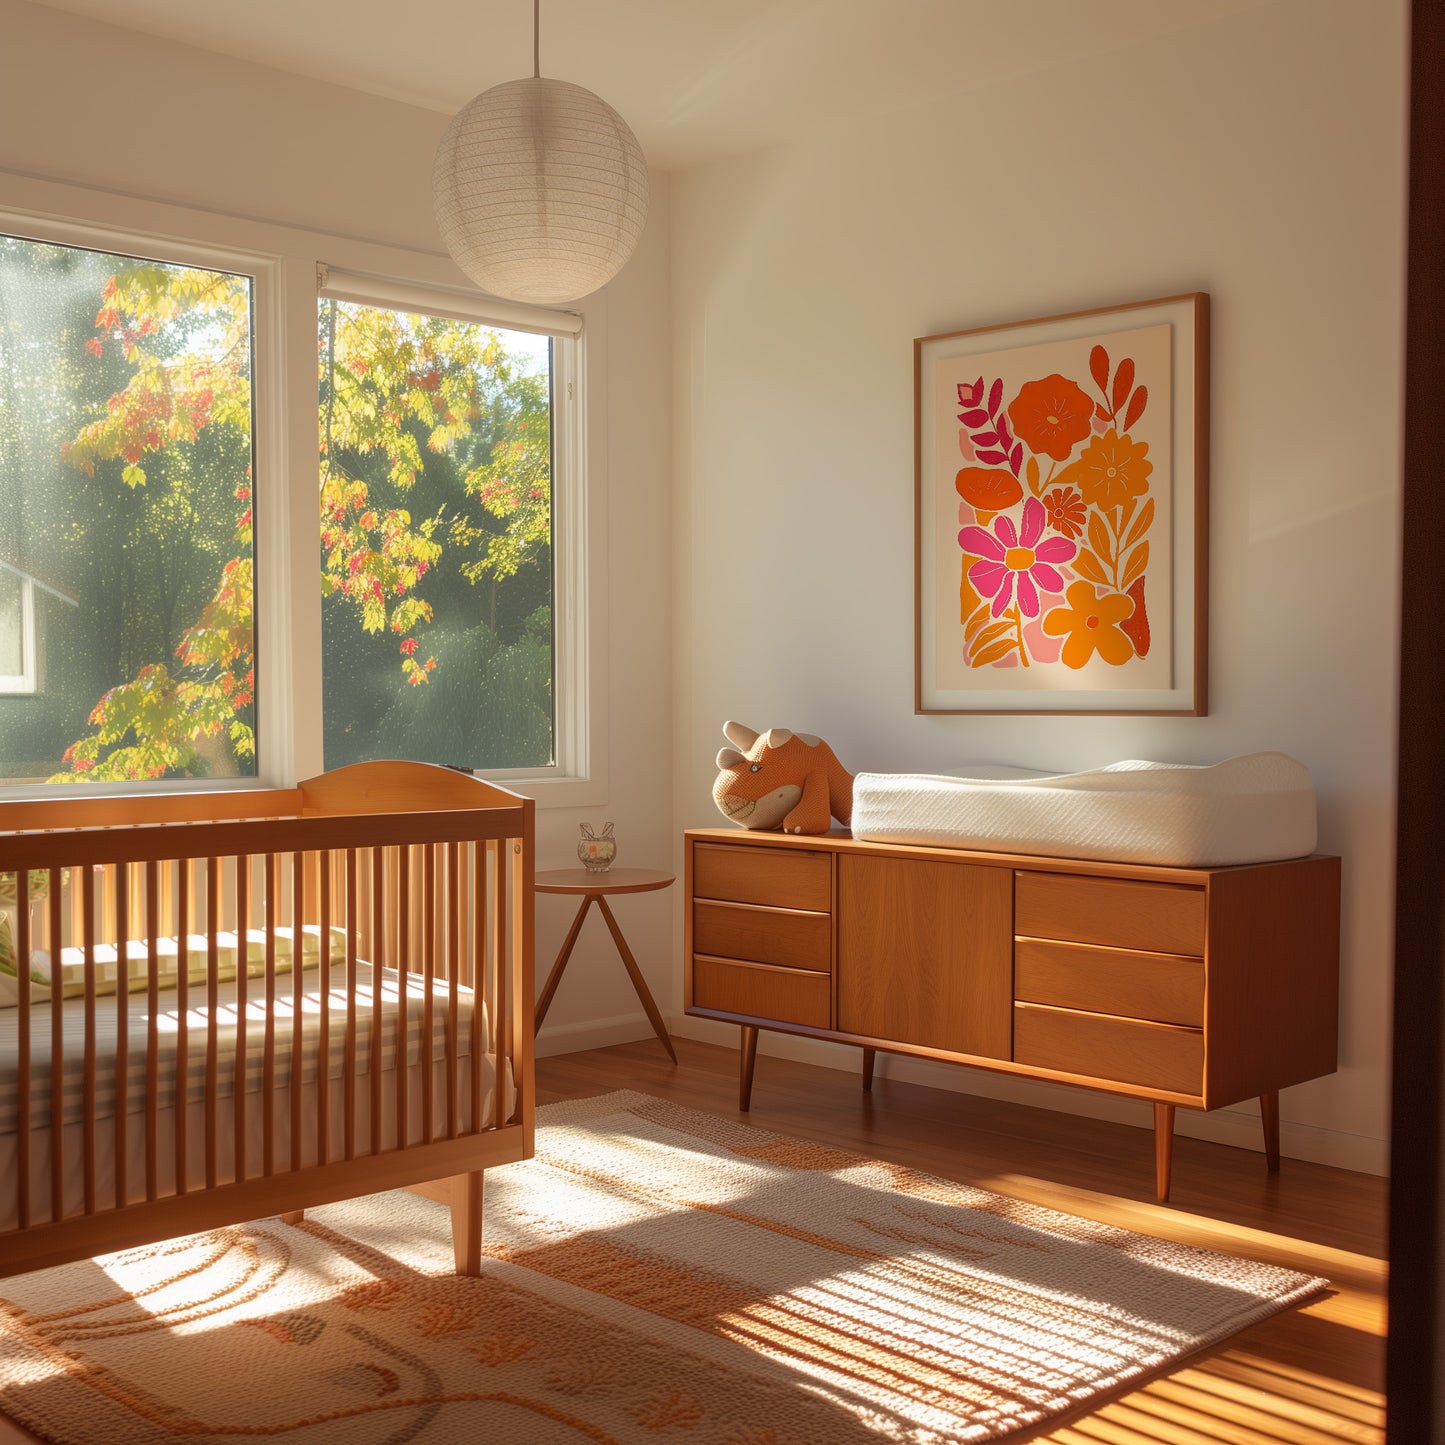 Sunny nursery room with a wooden crib, dresser, and colorful artwork near autumn trees outside the window.